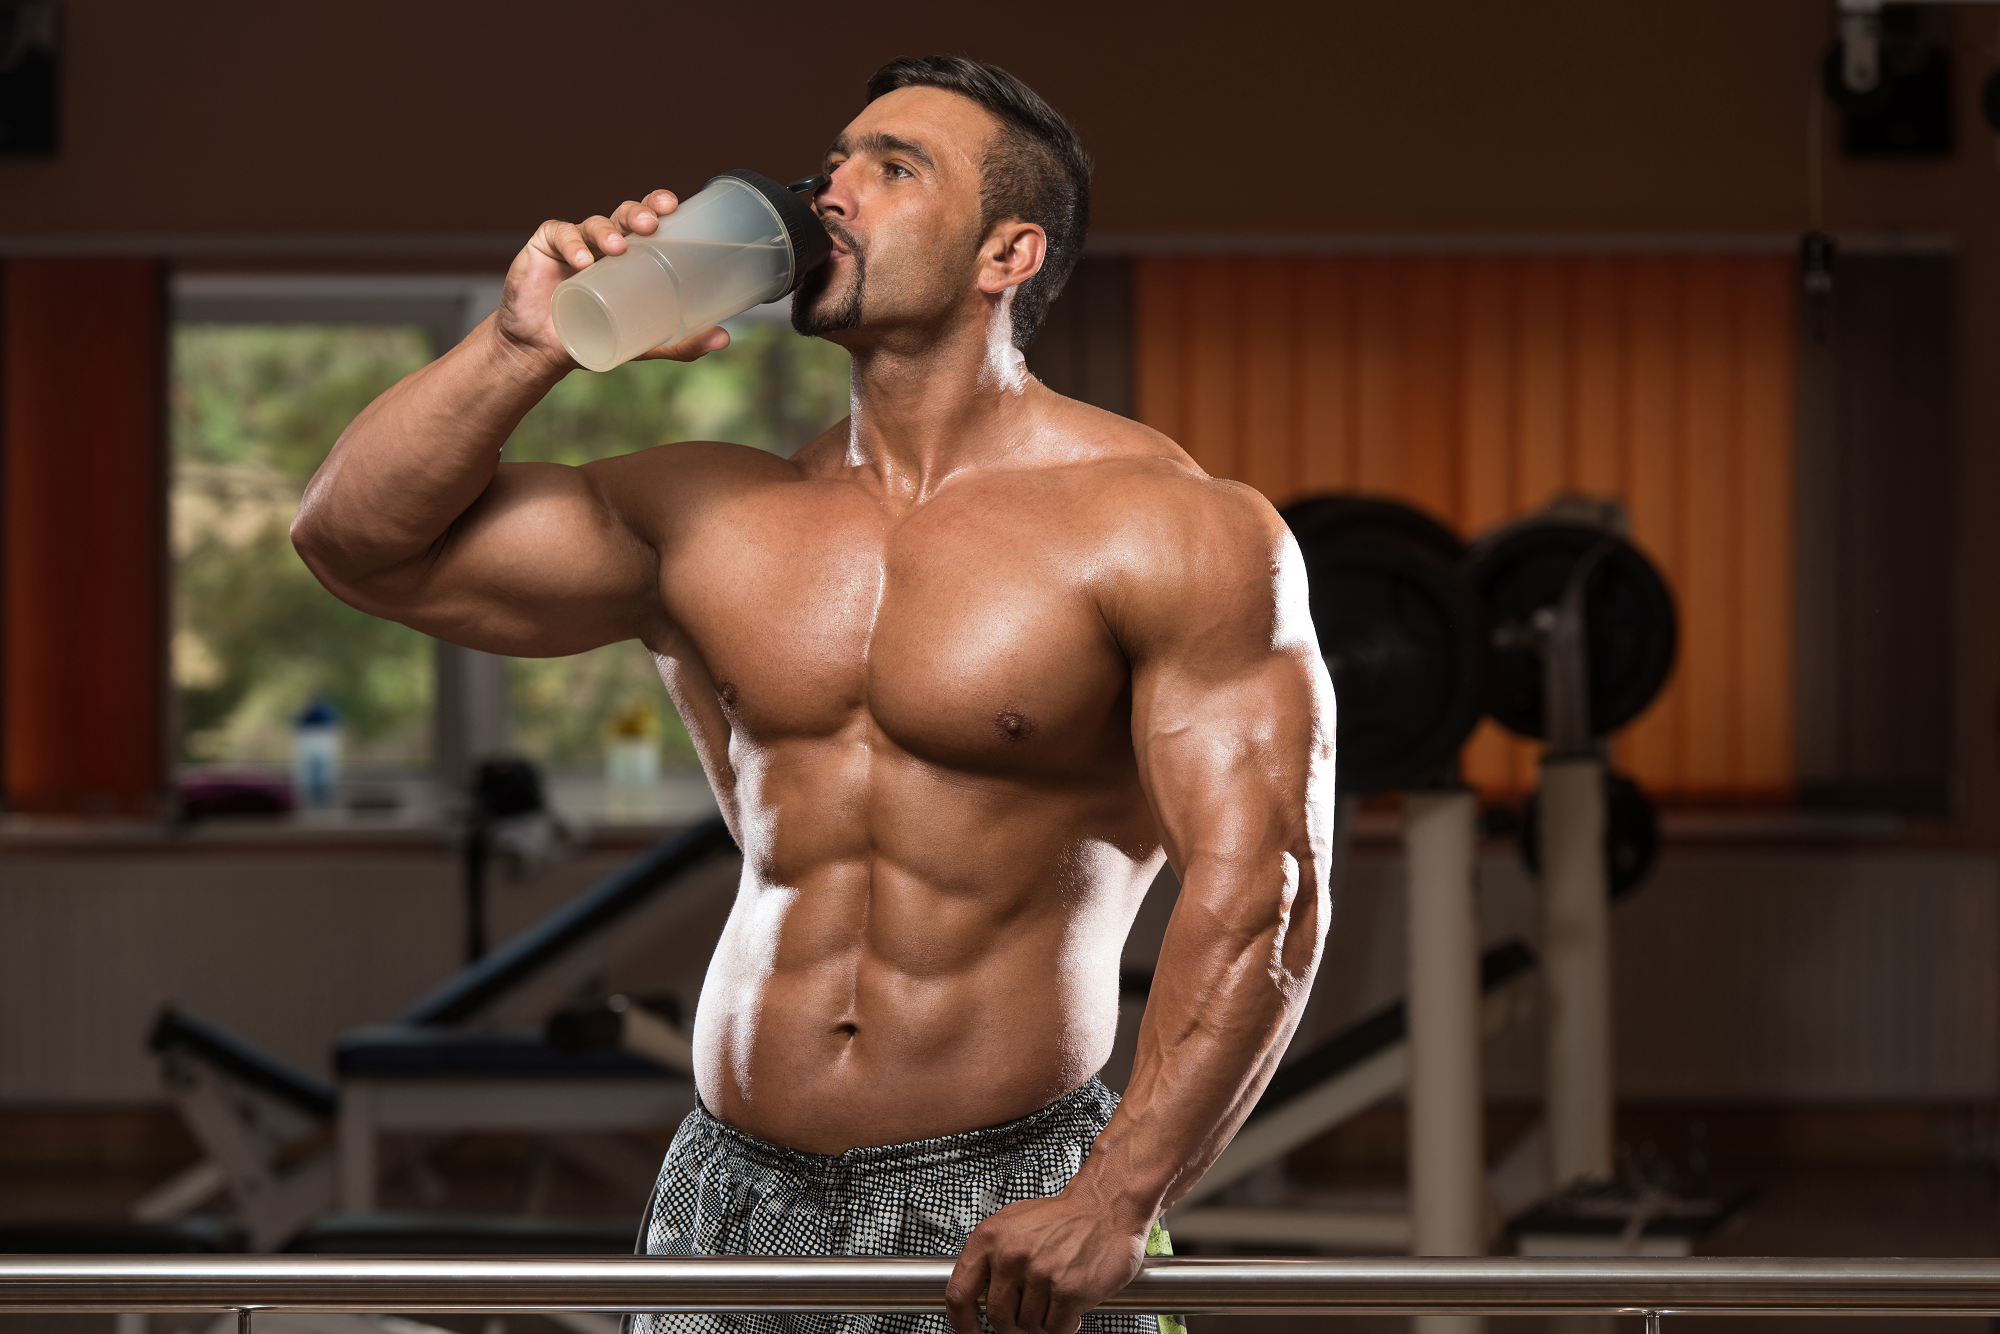 What Would Happen If You Replace All Drinks with Water?(Bodybuilders)